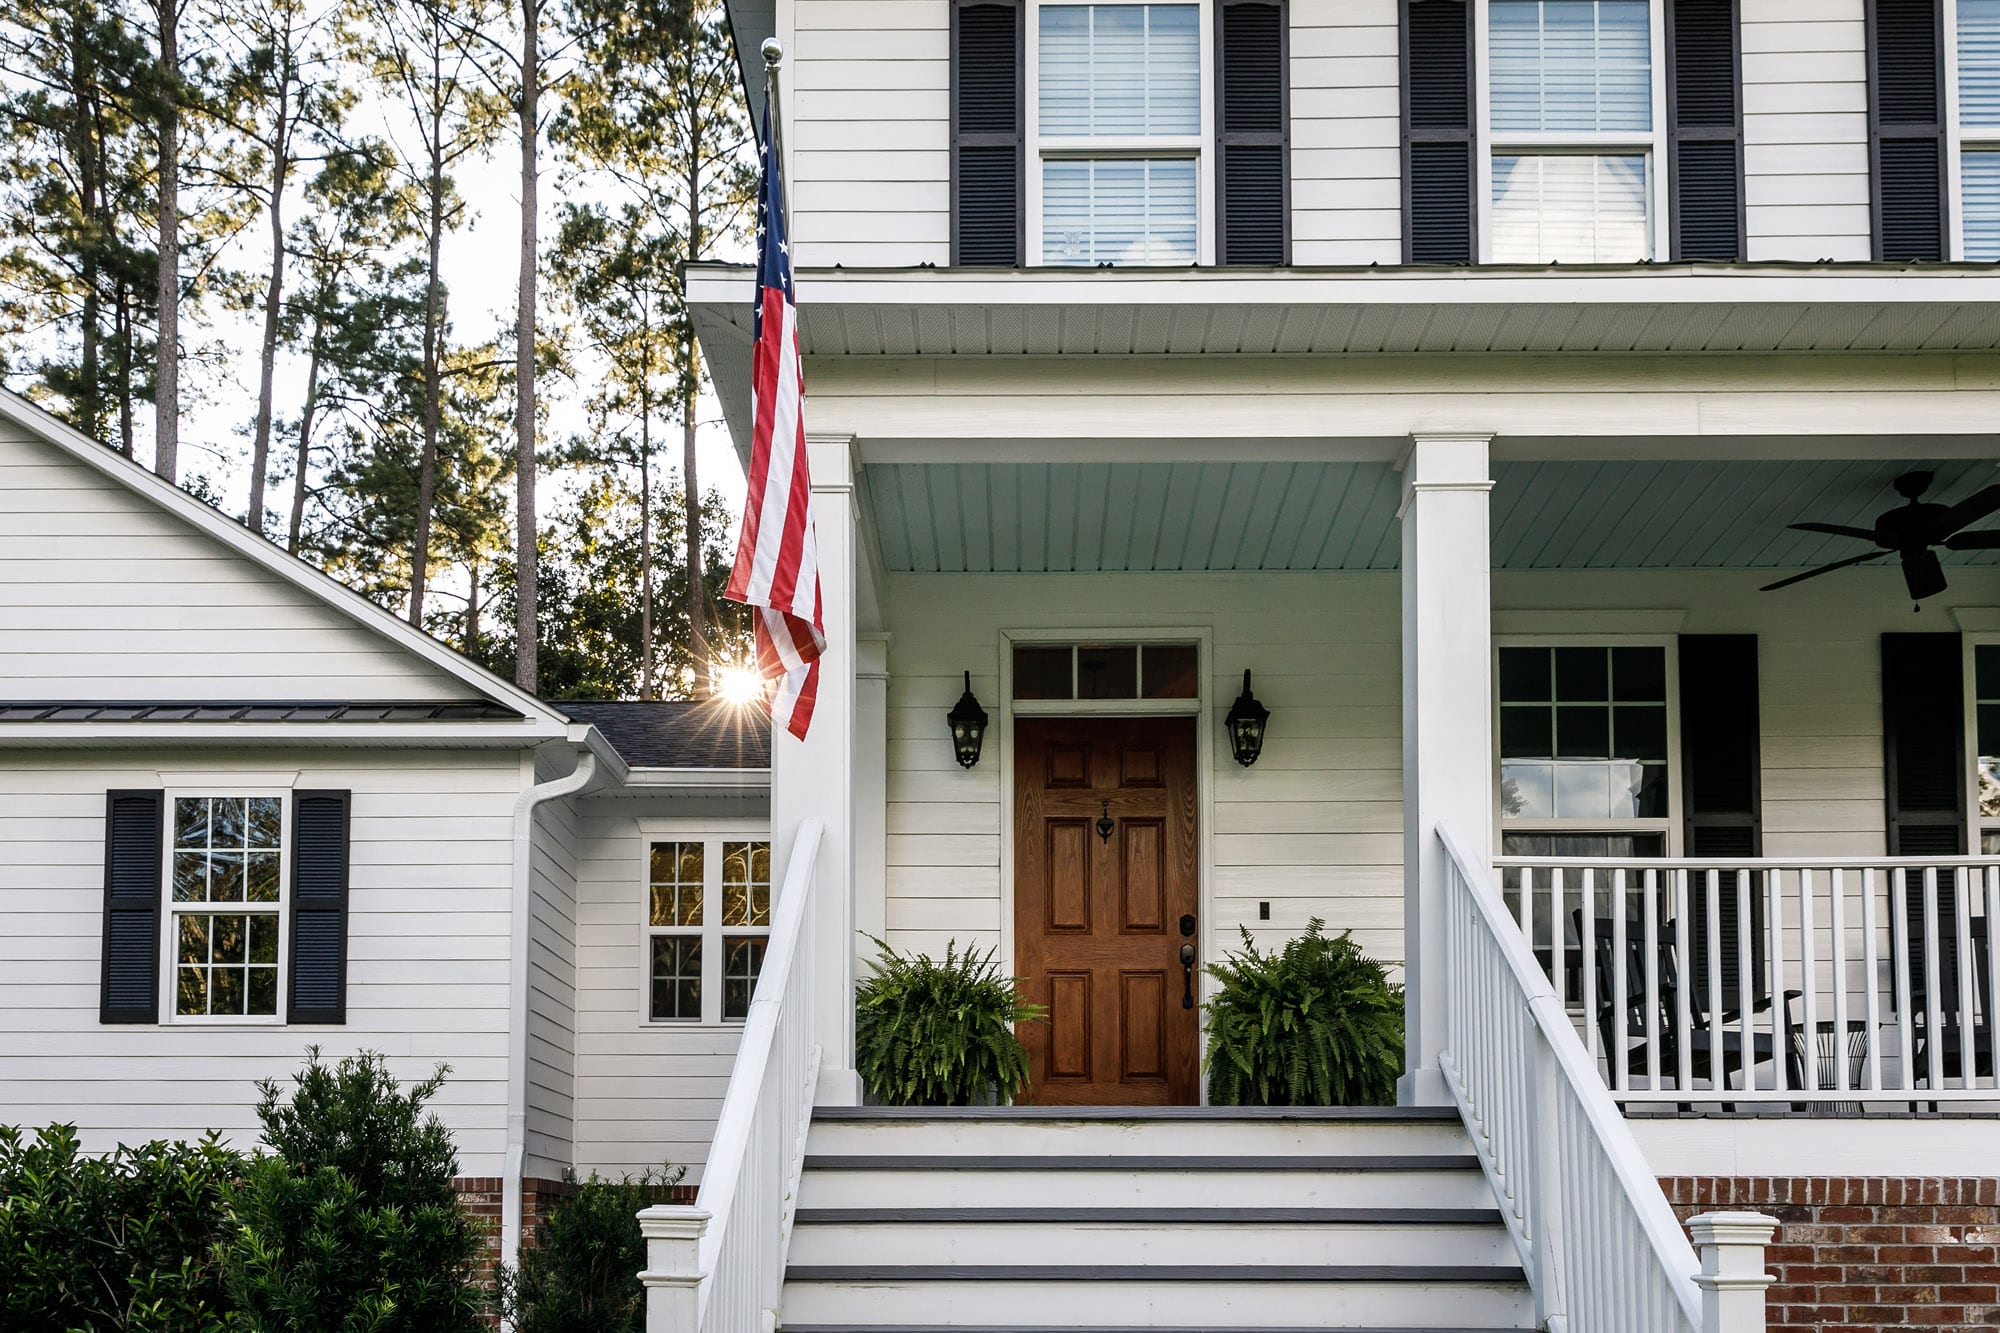 Tips for selling your home the right way